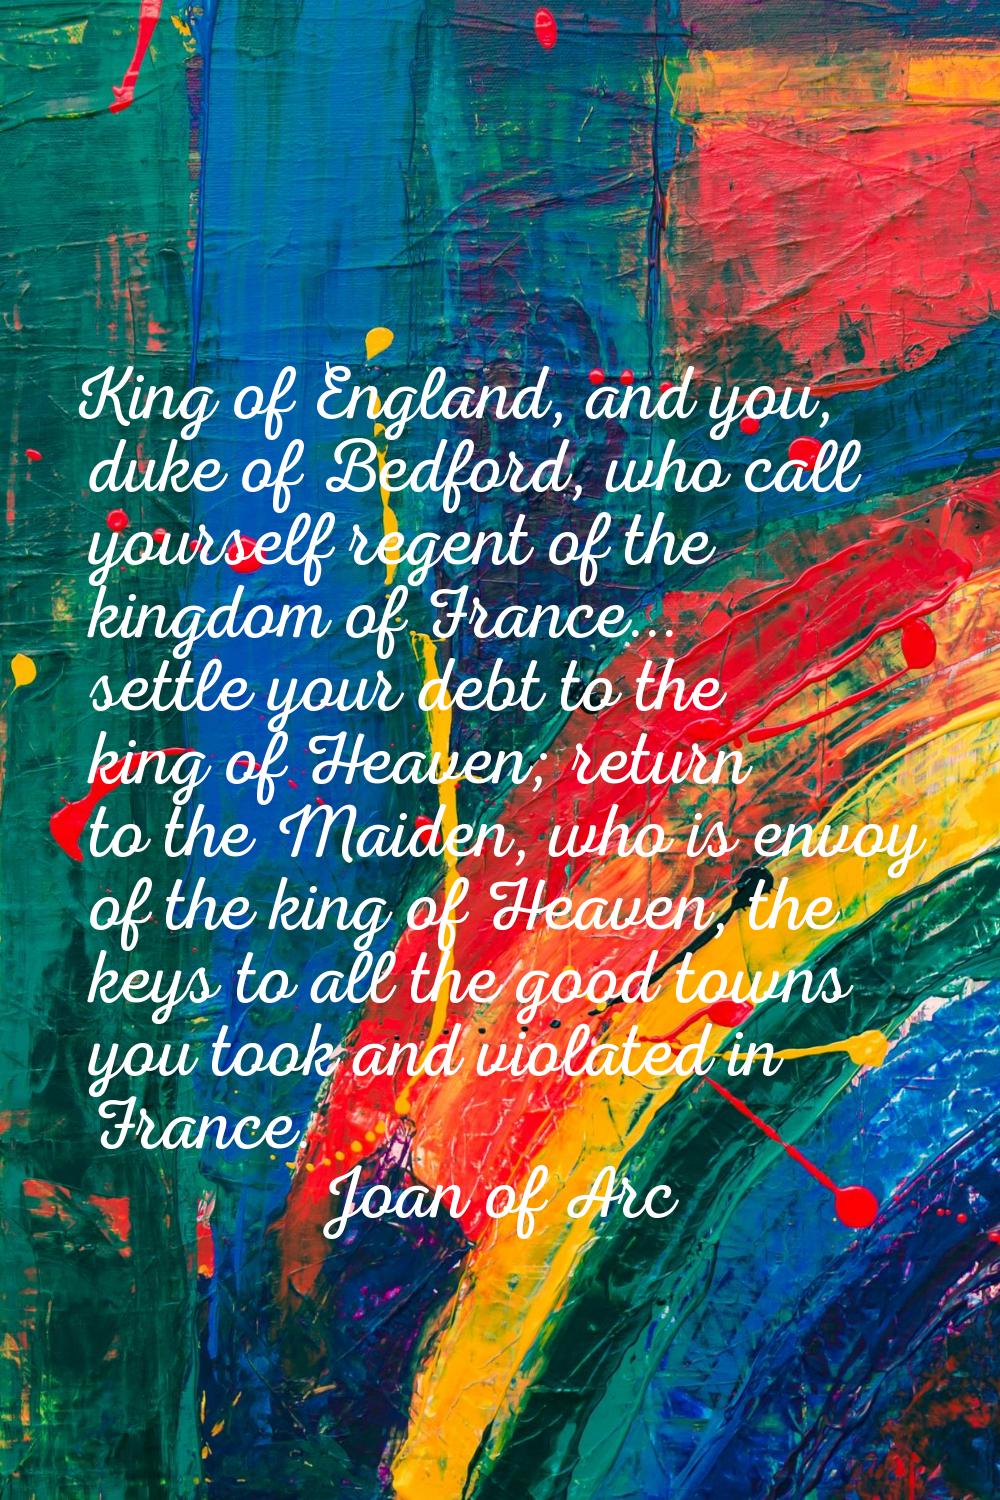 King of England, and you, duke of Bedford, who call yourself regent of the kingdom of France... set